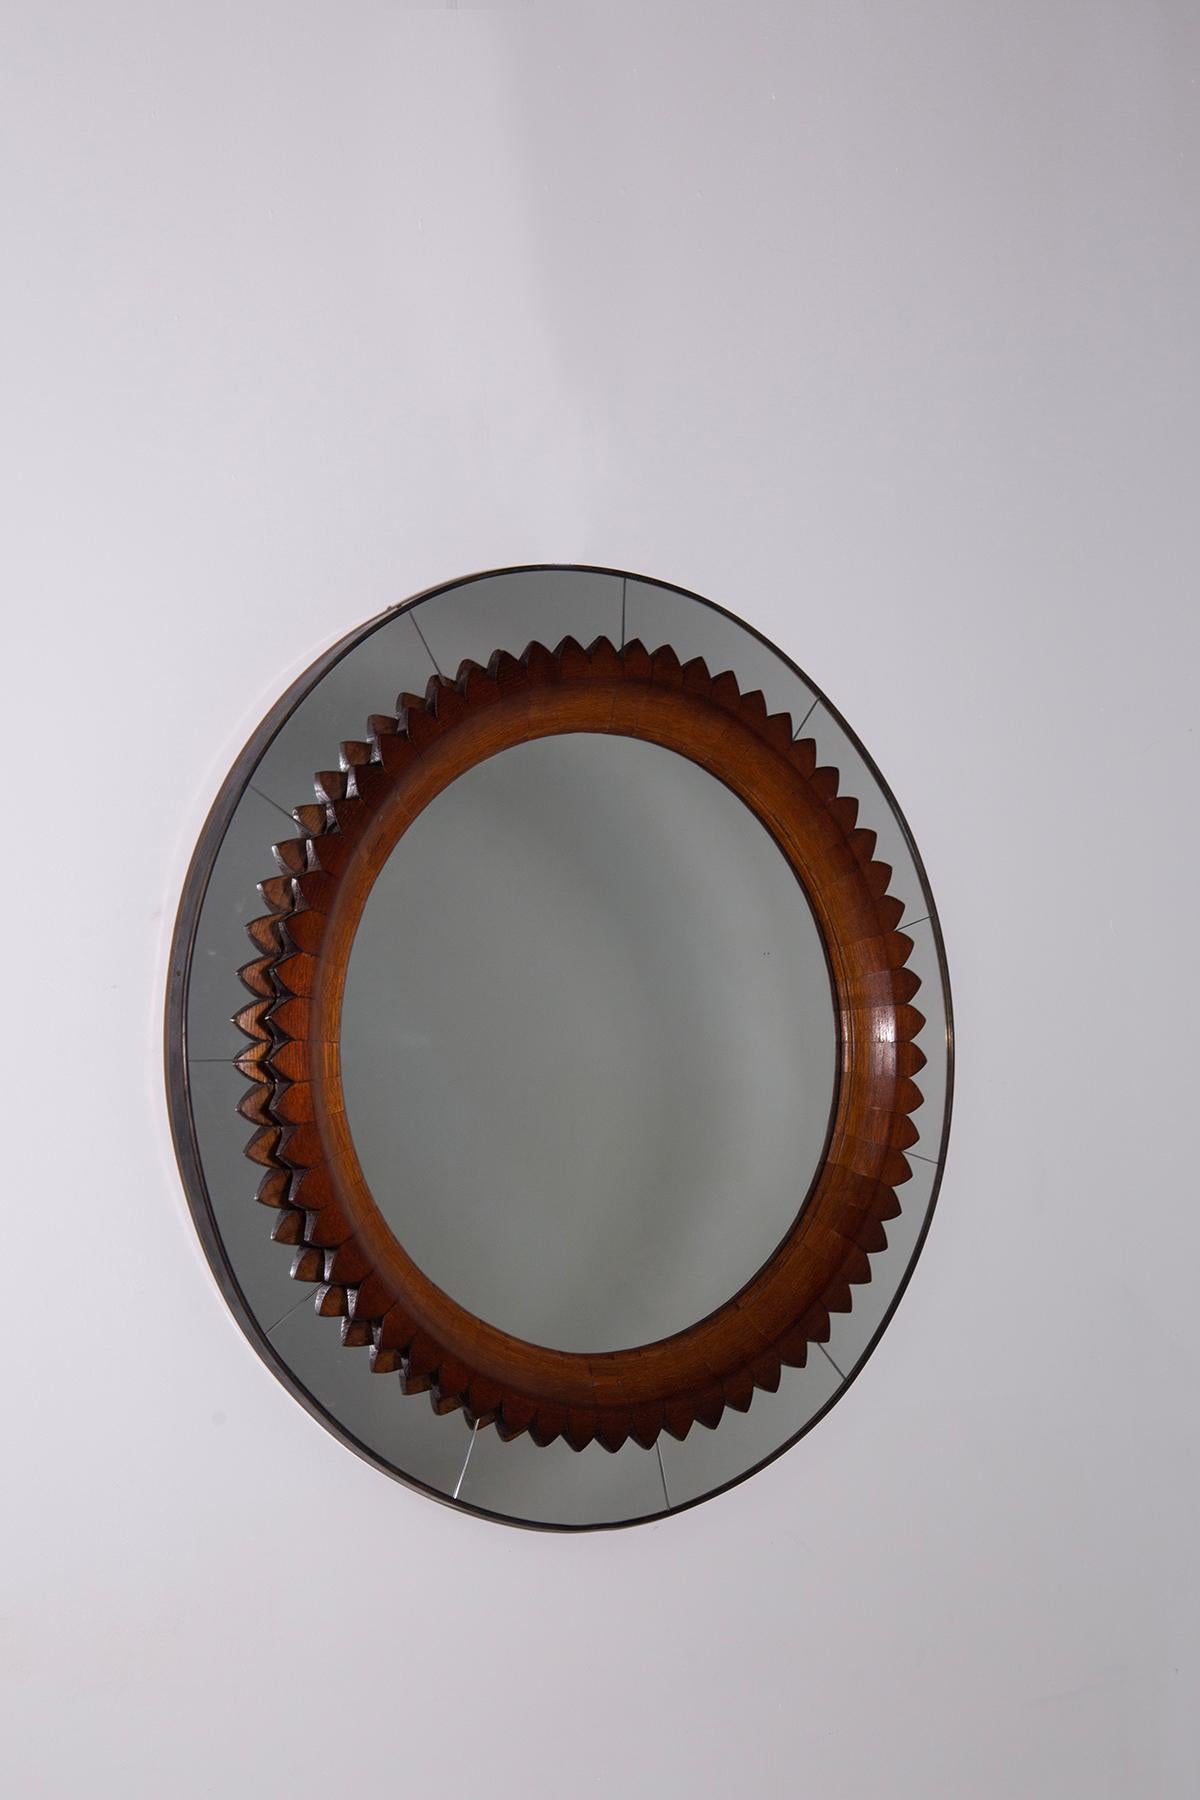 Behold a masterpiece of 1950s Italian craftsmanship by Fratelli Marelli: a stunning round mirror, encased in the warm embrace of walnut wood. This exquisite piece stands as a testament to the era's unparalleled attention to detail and the enduring